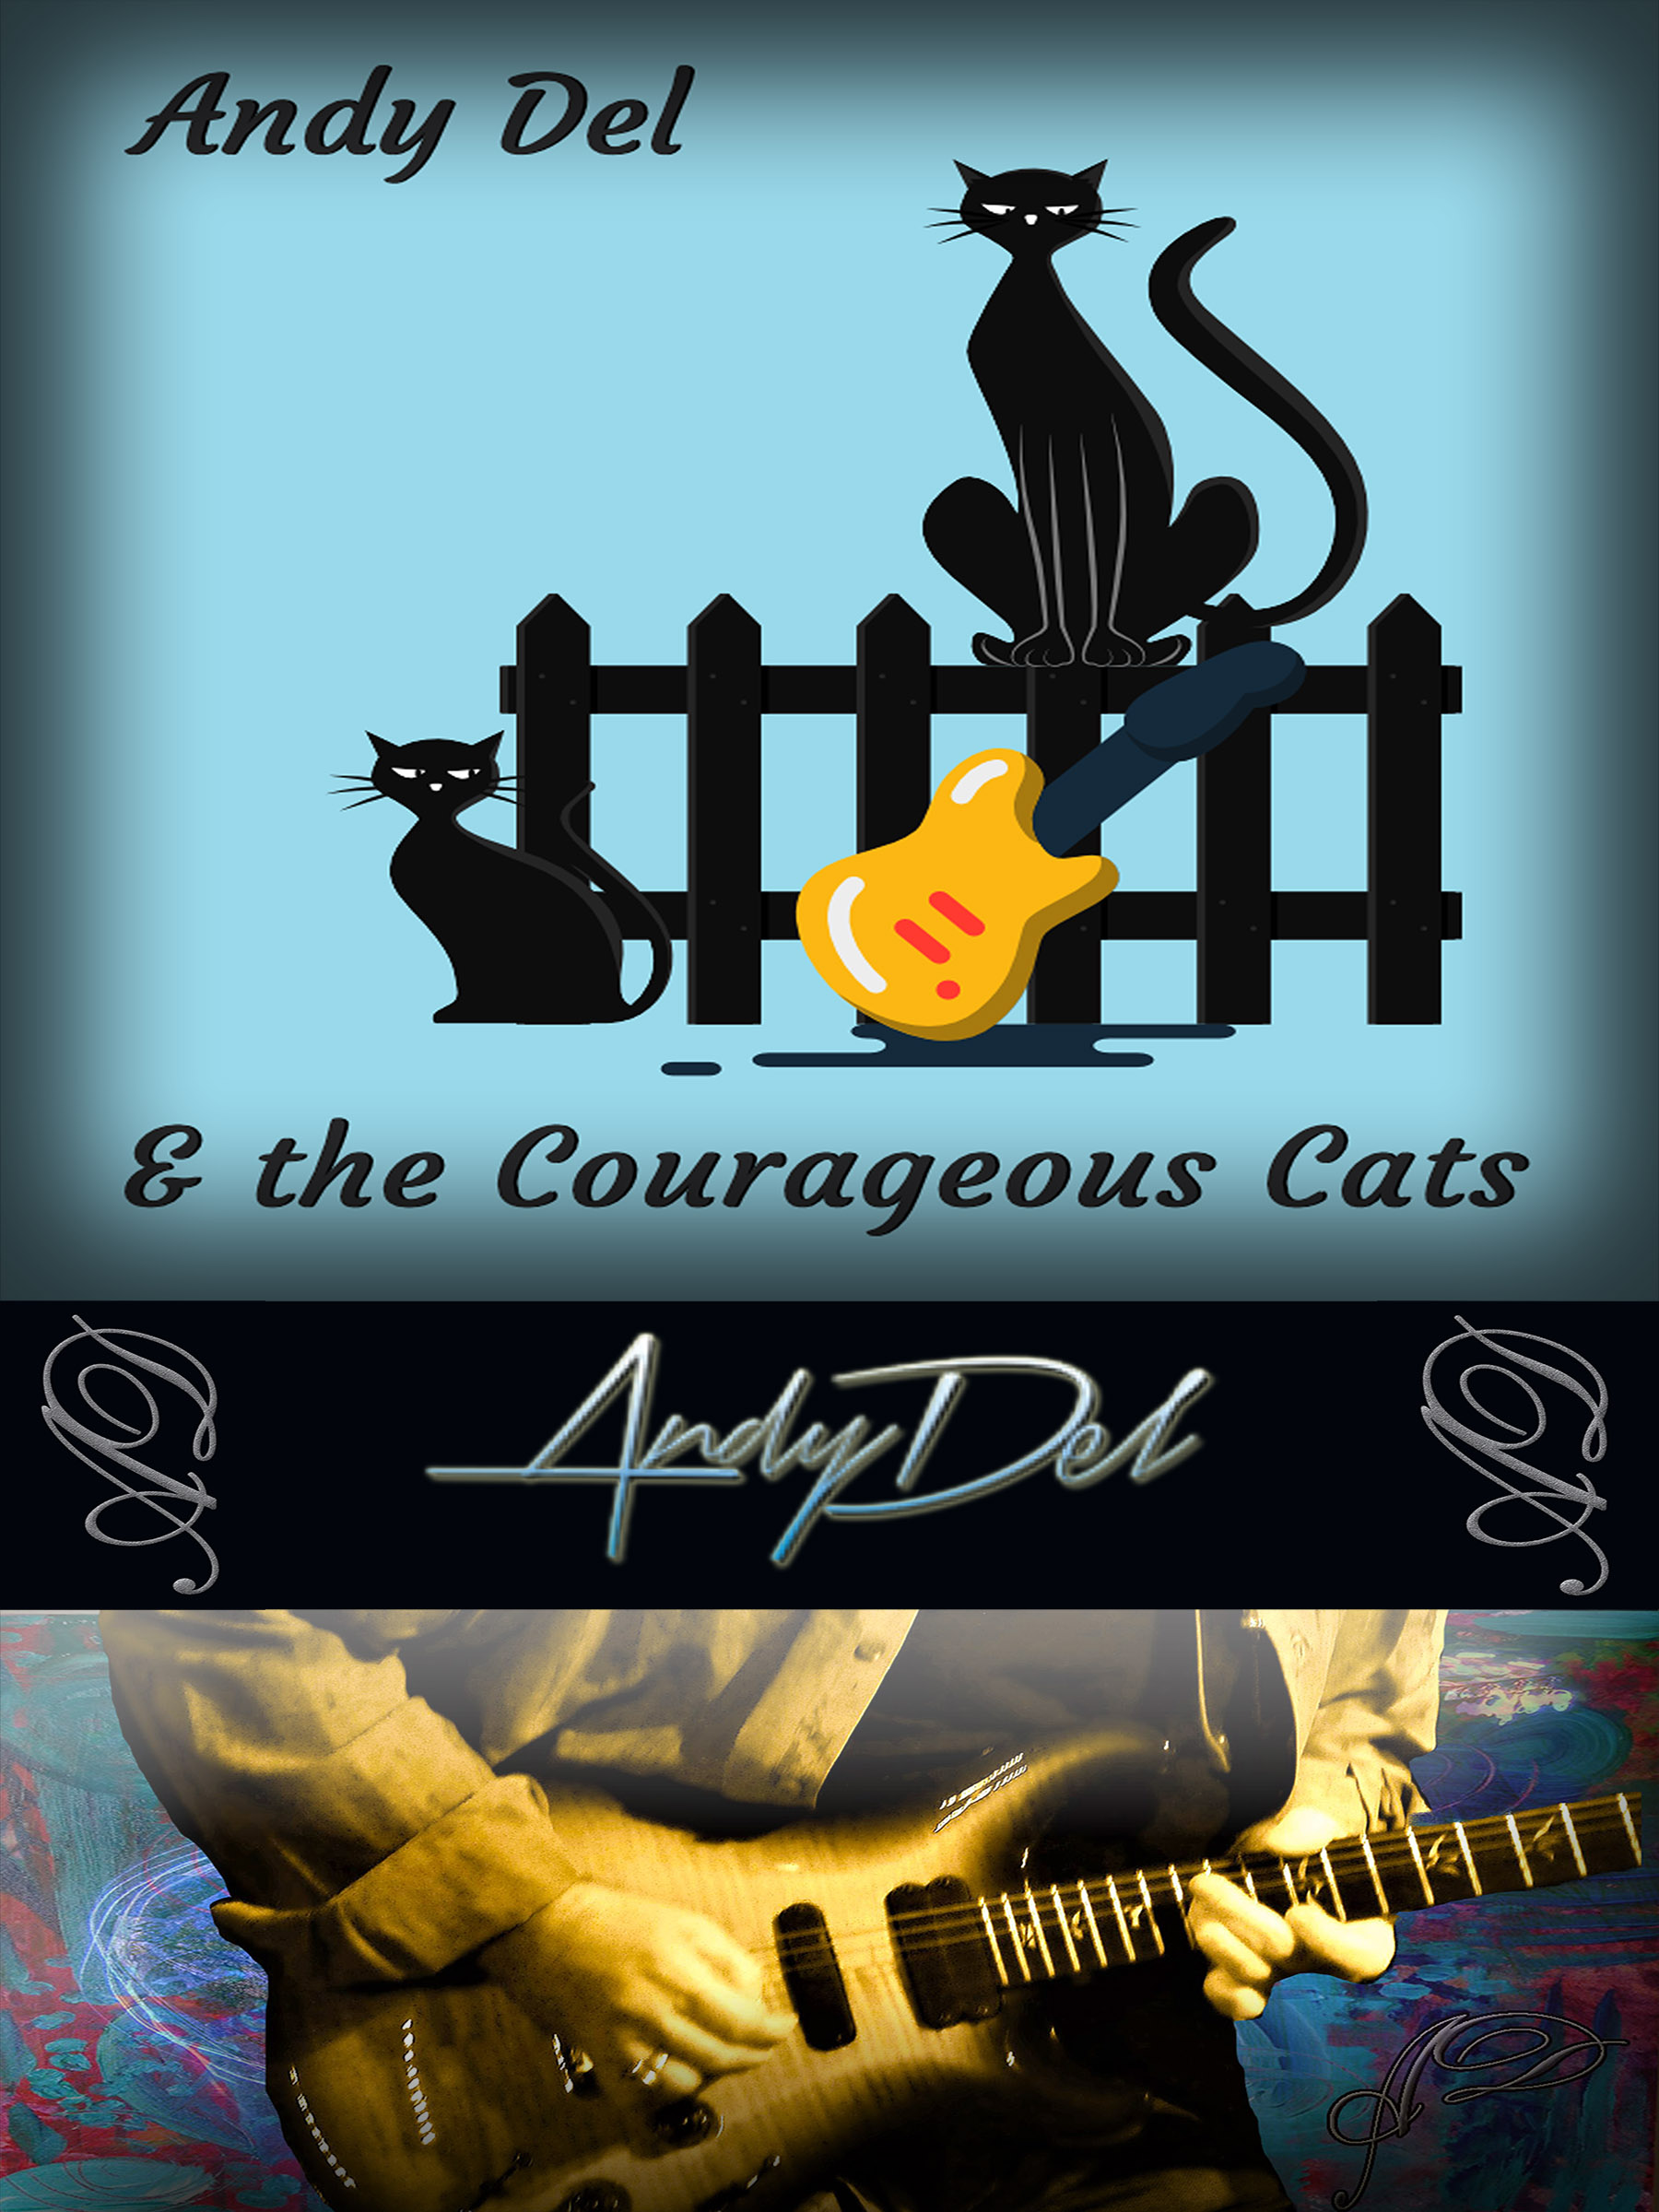 Andy Del and the Courageous Cats at RipTides - Saturday, May 11th